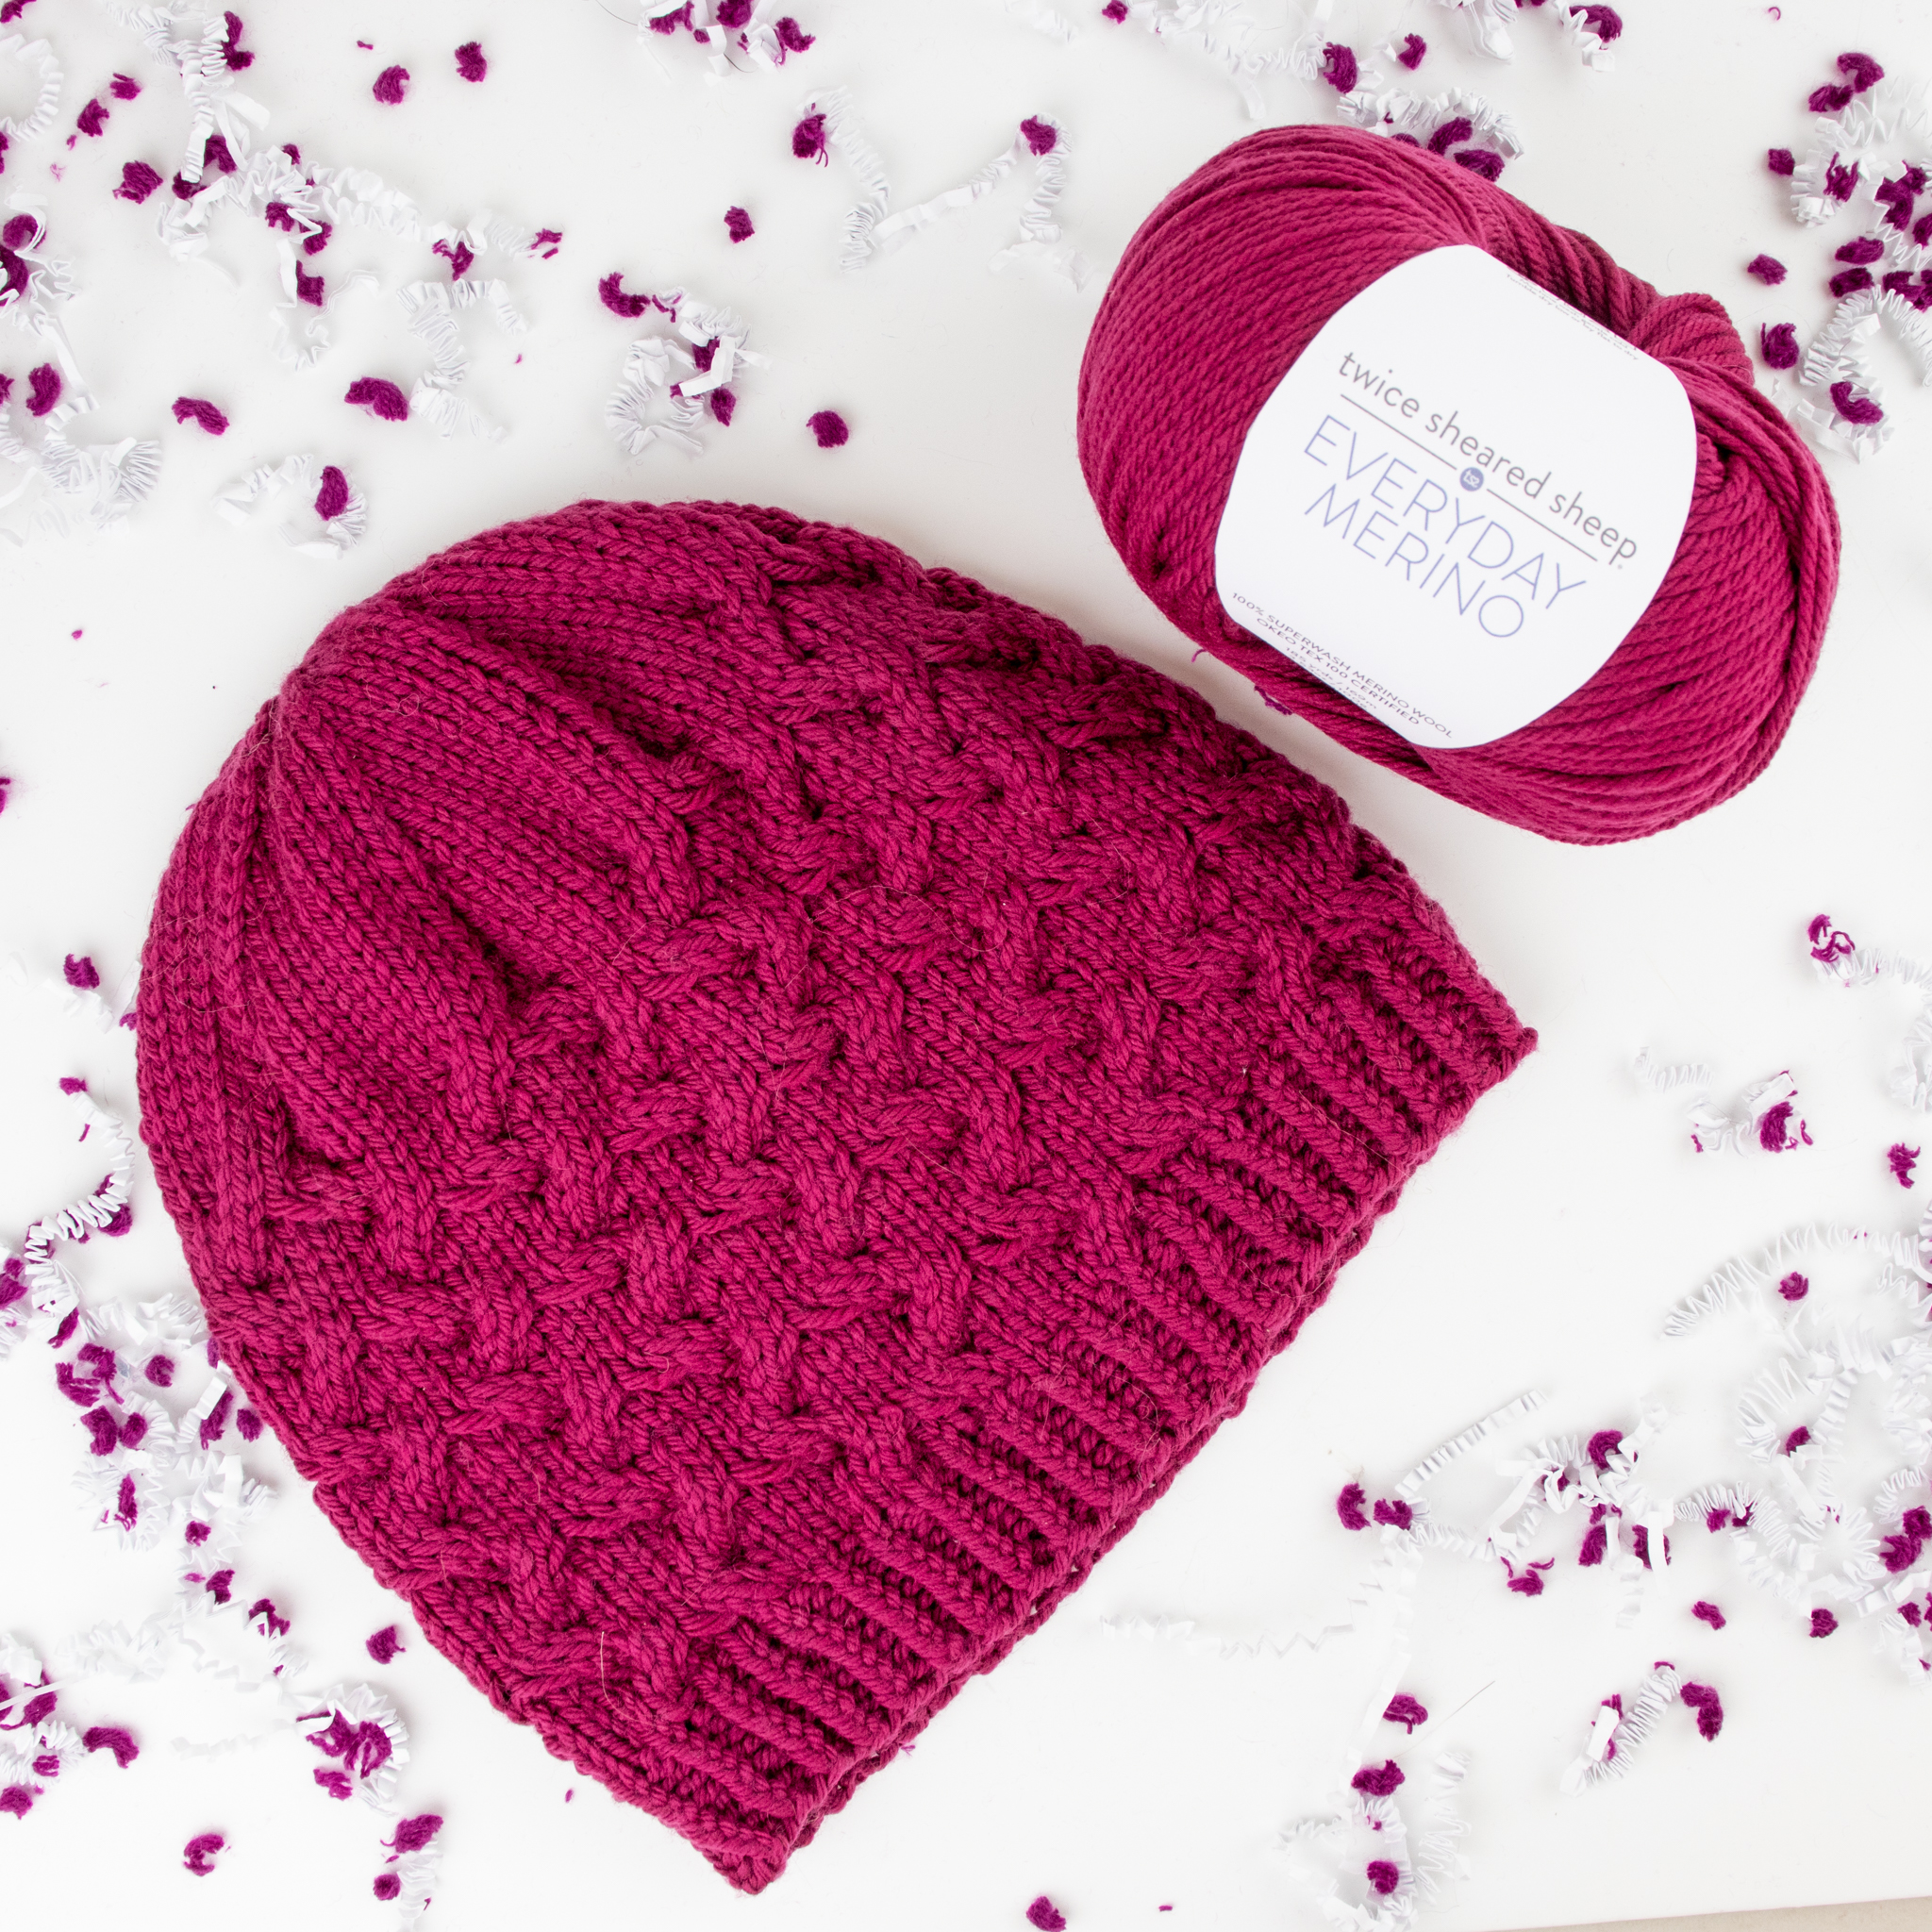 Alexander Cable Beanie Knitting Pattern by Jessica Ays